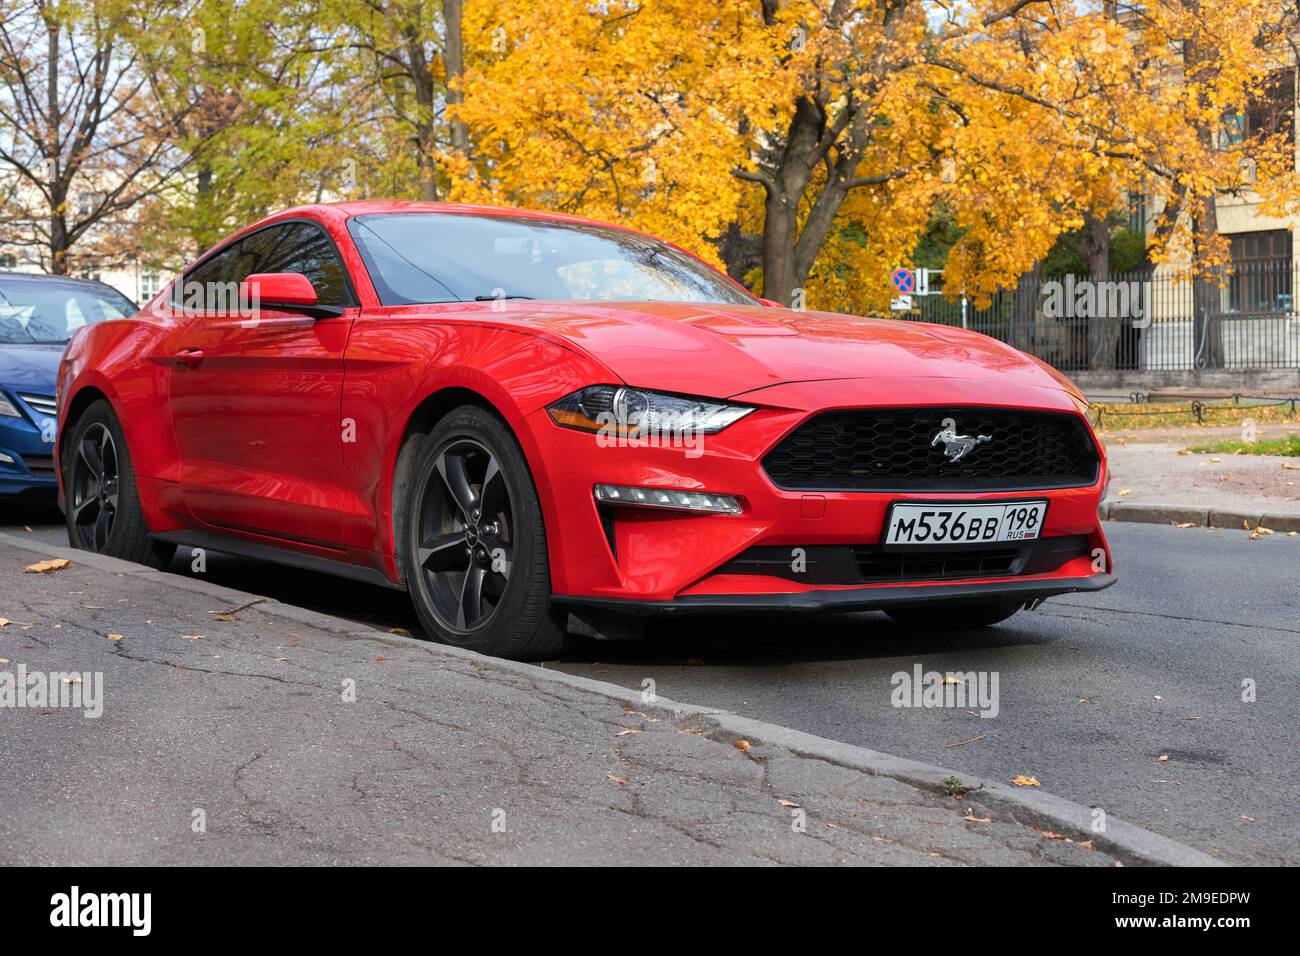 St-Petersburg, Russia - October 7, 2021: Sixth generation Ford Mustang GT, red sporty coupe car stands parked on the street Stock Photo